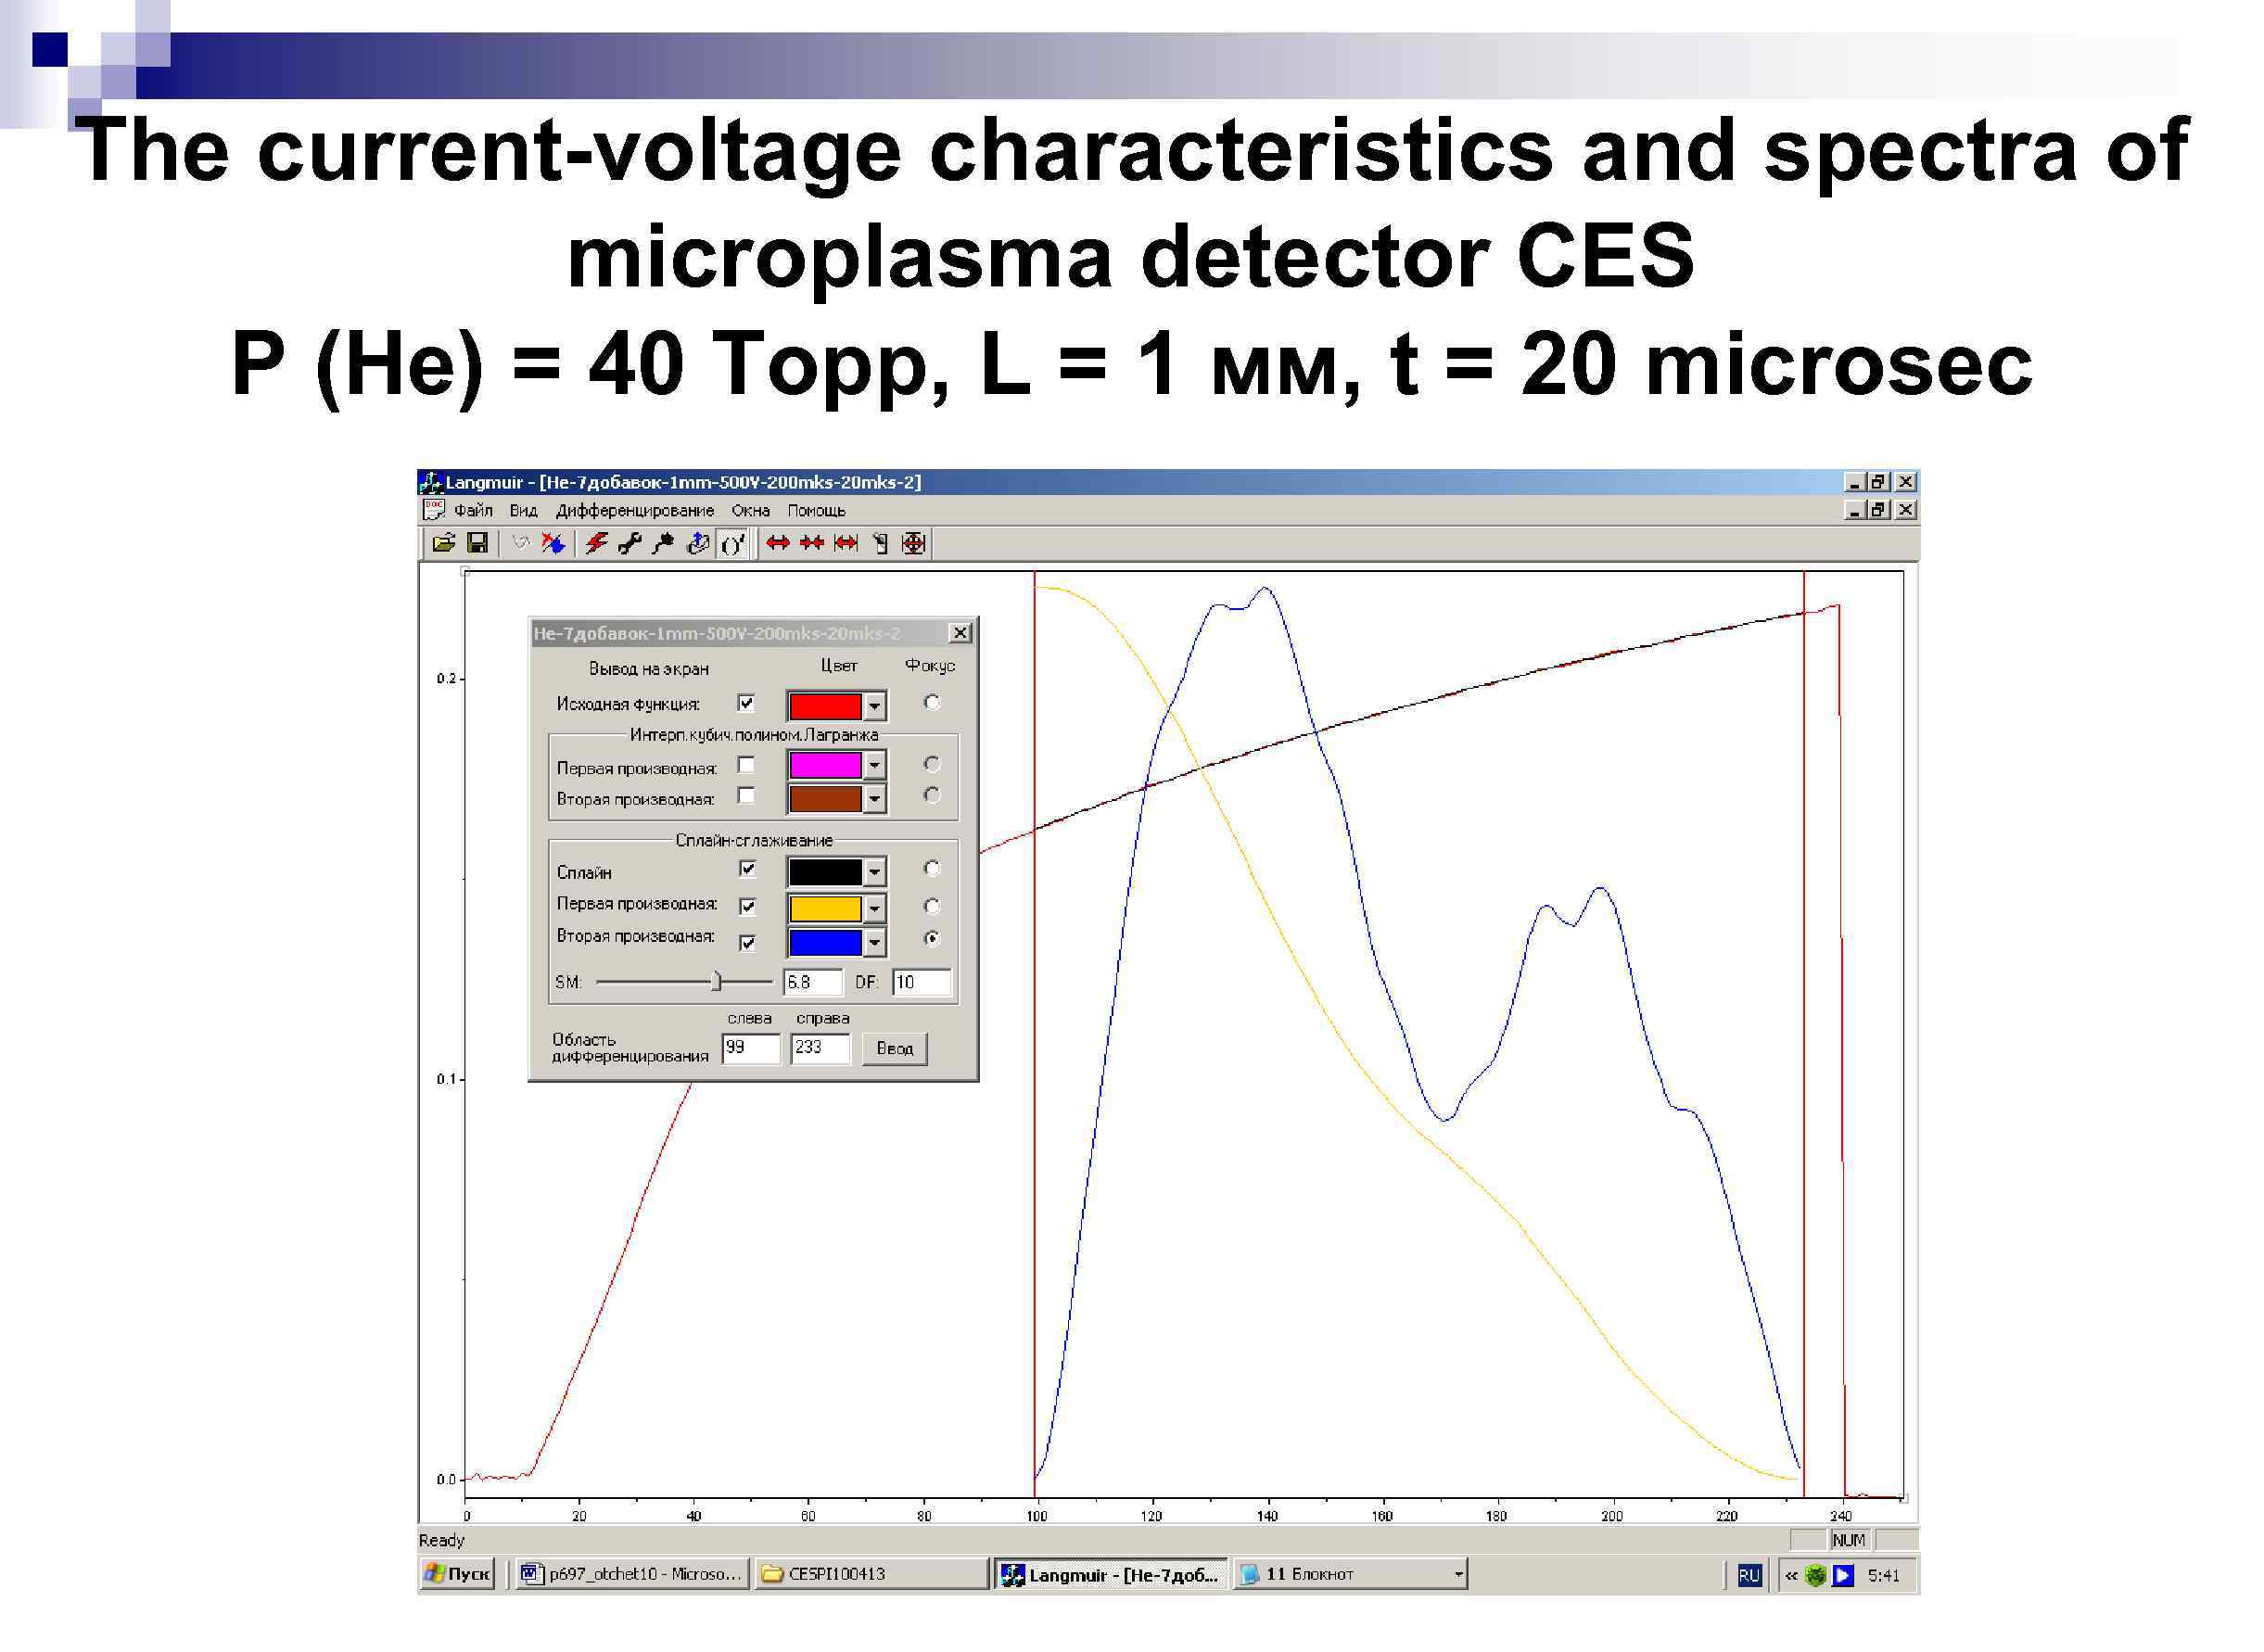 The current-voltage characteristics and spectra of microplasma detector CES P (He) = 40 Торр,